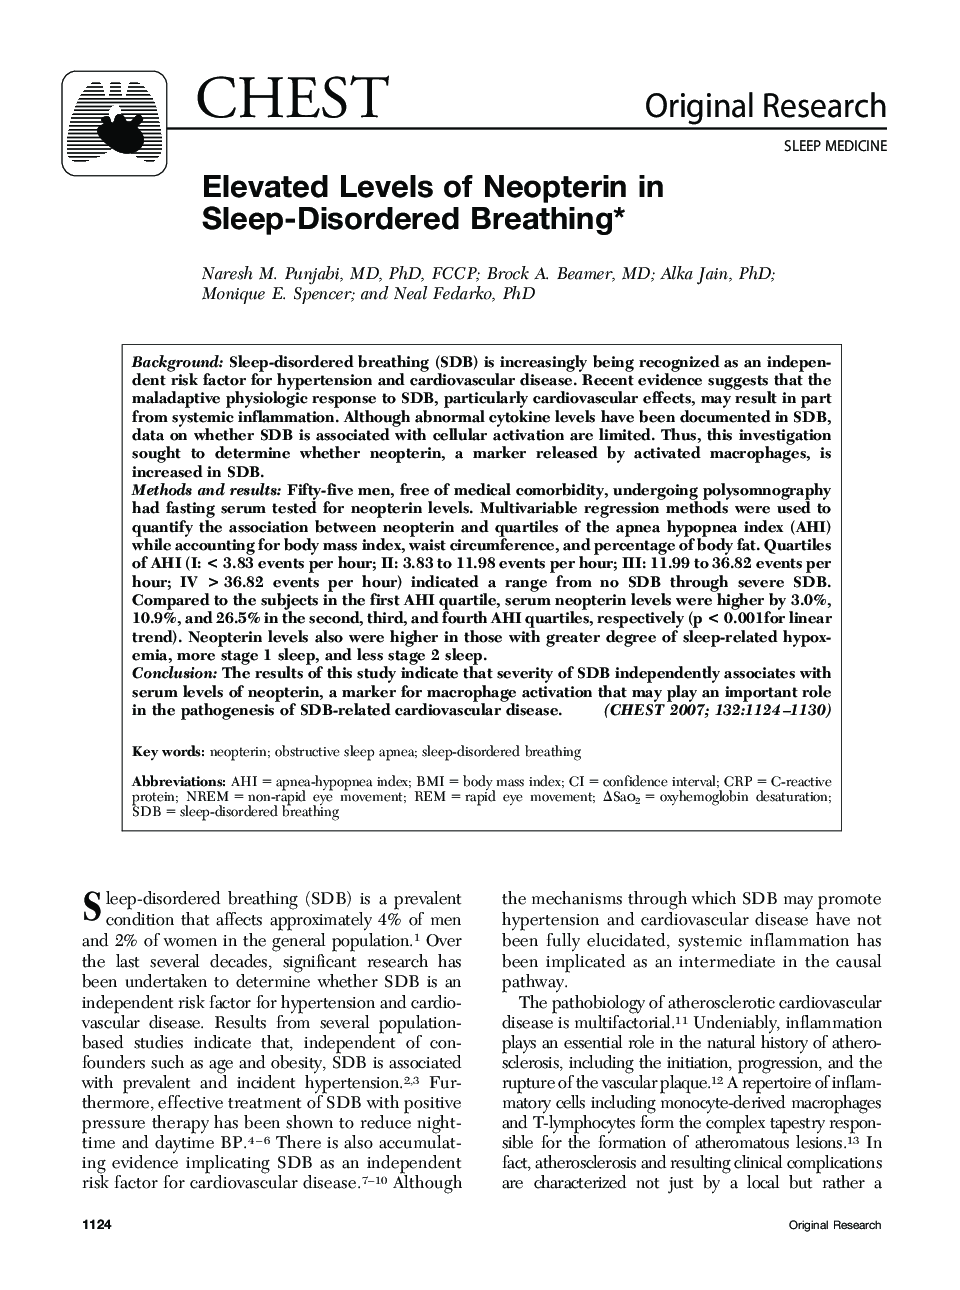 Elevated Levels of Neopterin in Sleep-Disordered Breathing 